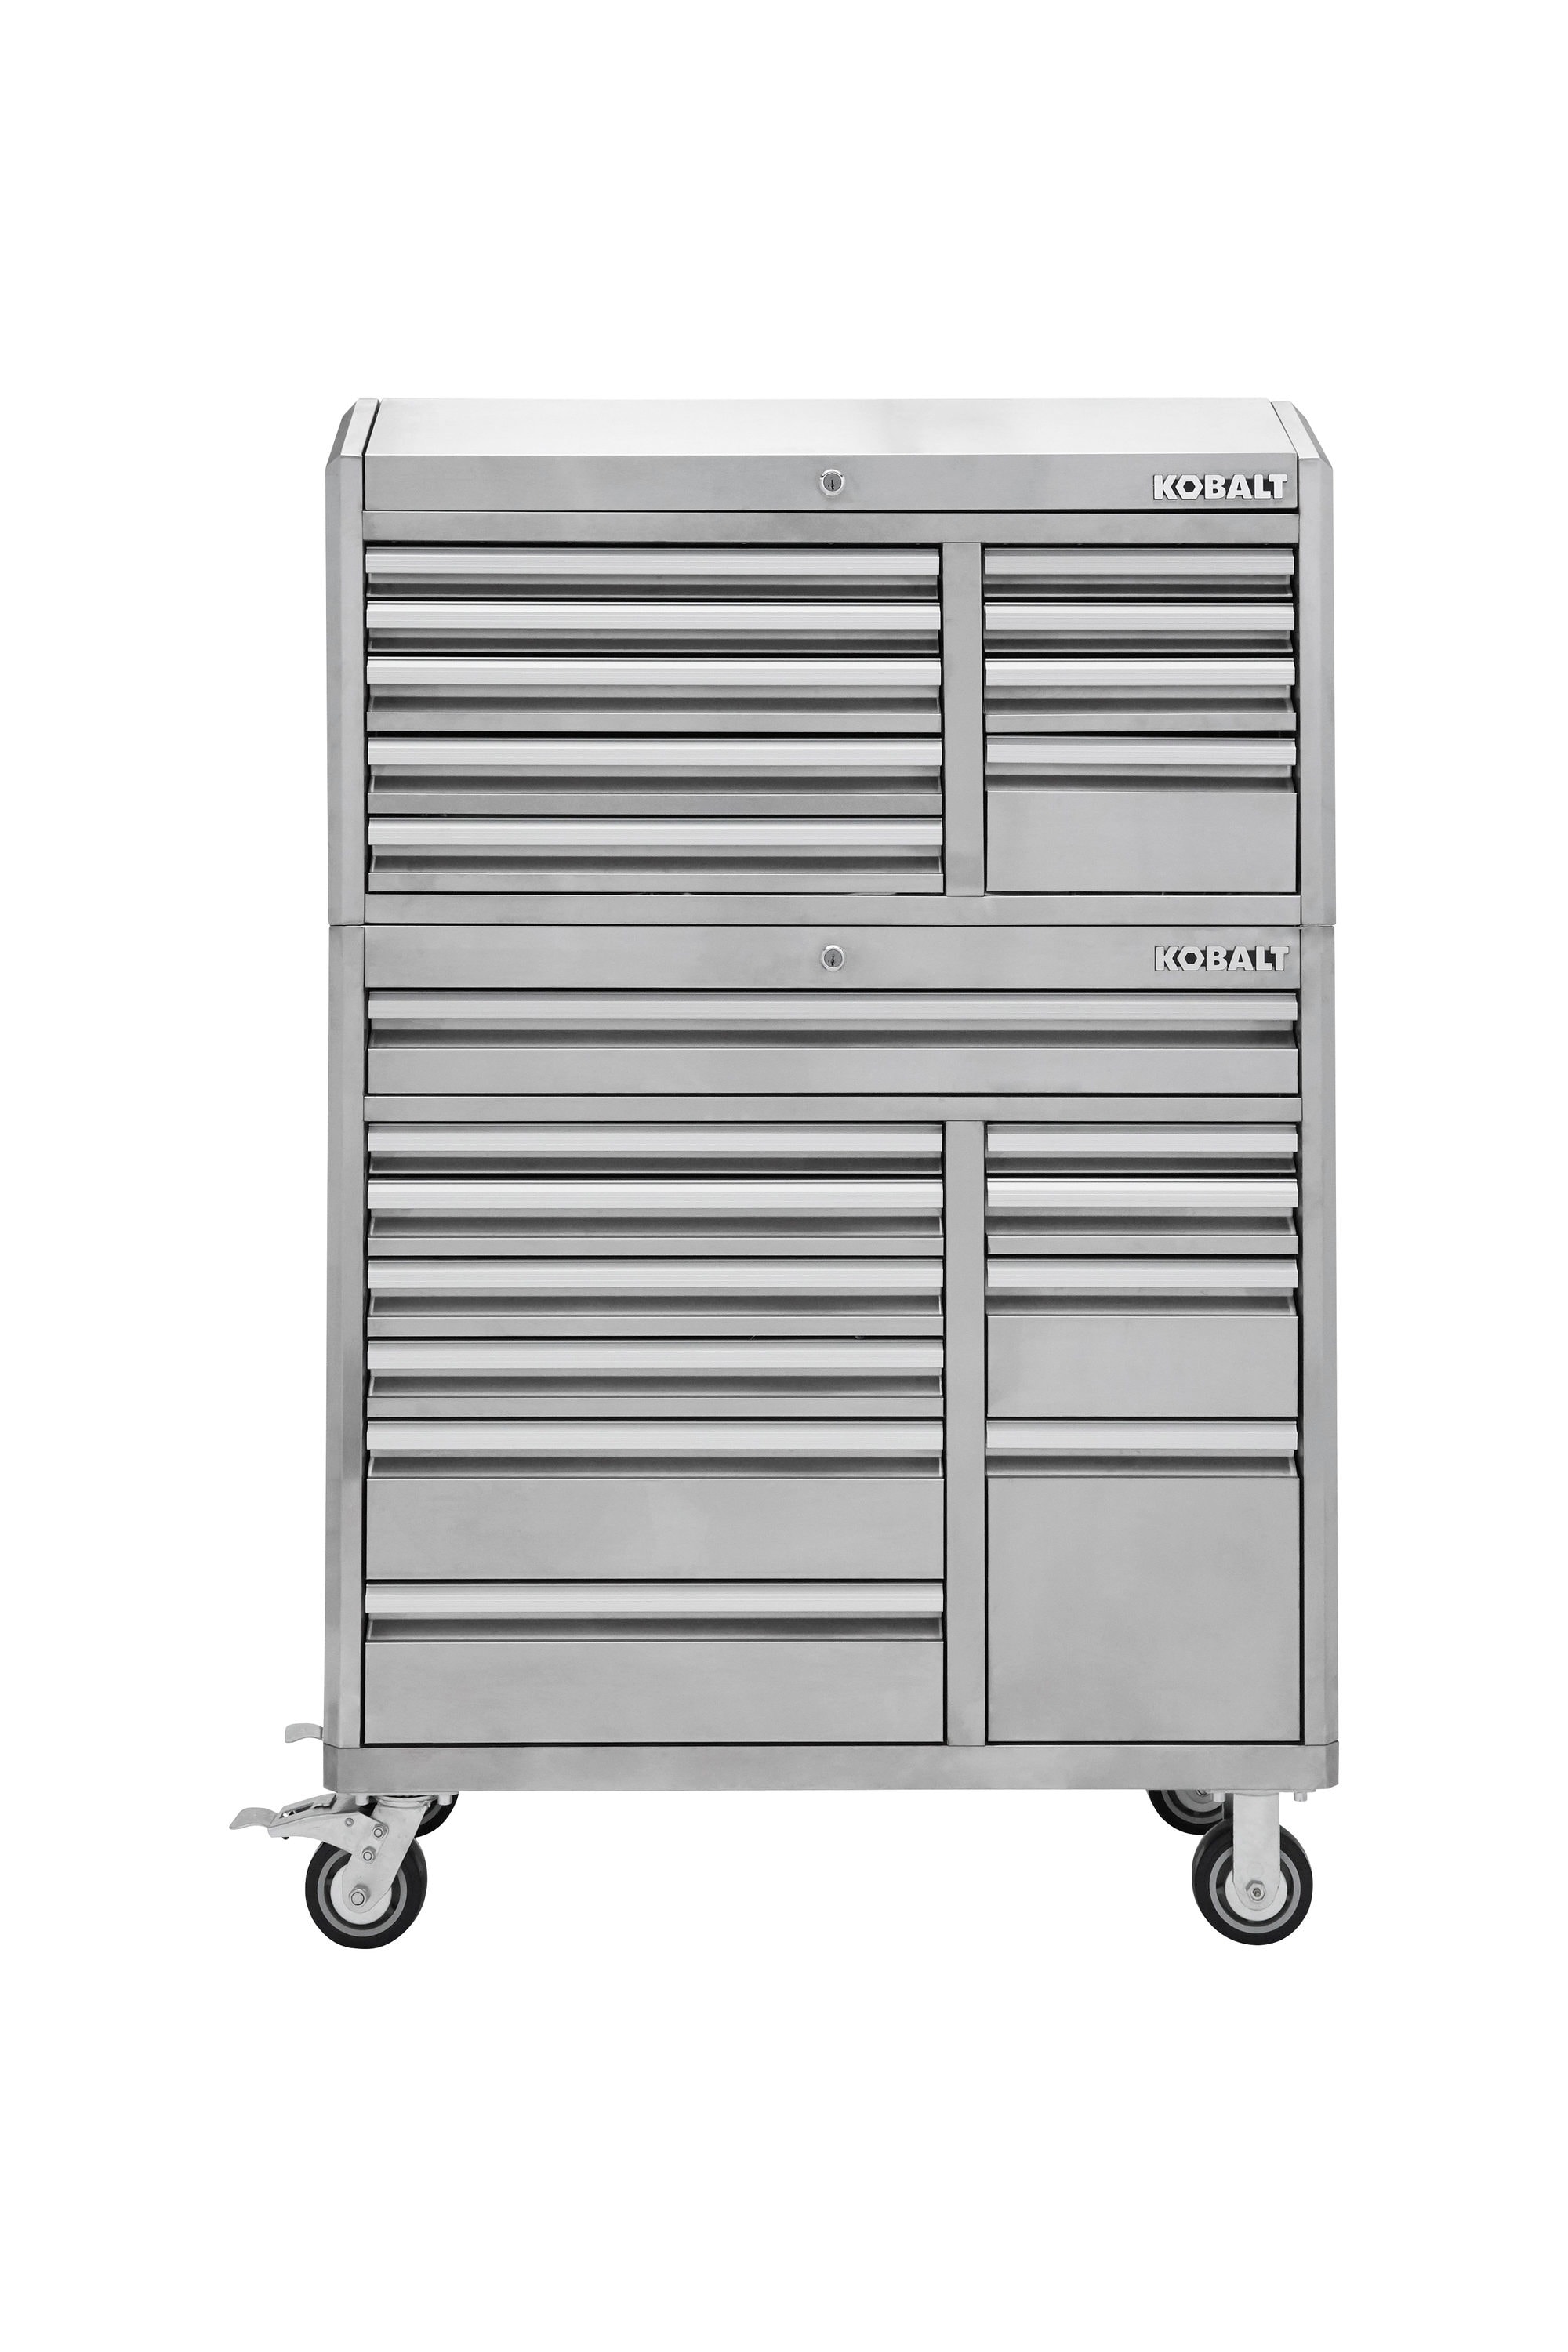 Kobalt 3000 Series 41-in W x 41-in H 11-Drawer Stainless Steel Rolling Tool  Cabinet (Stainless Steel) at